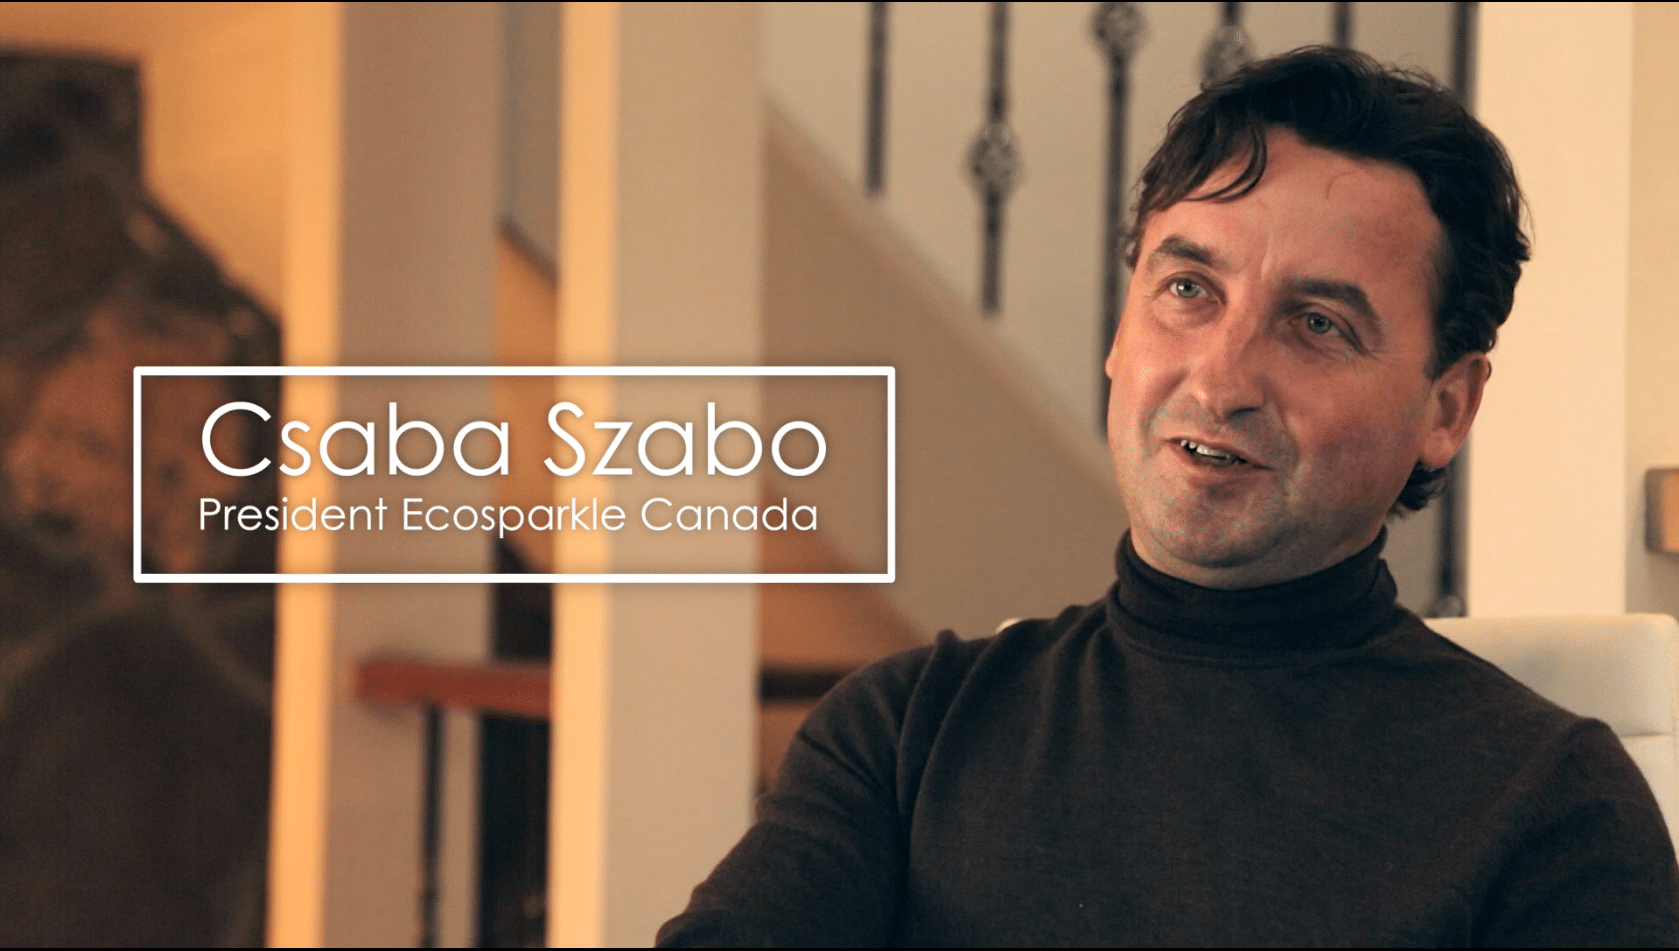 You are currently viewing How it All Began: A Video Interview with Csaba Szabo, President & Founder of Ecosparkle!